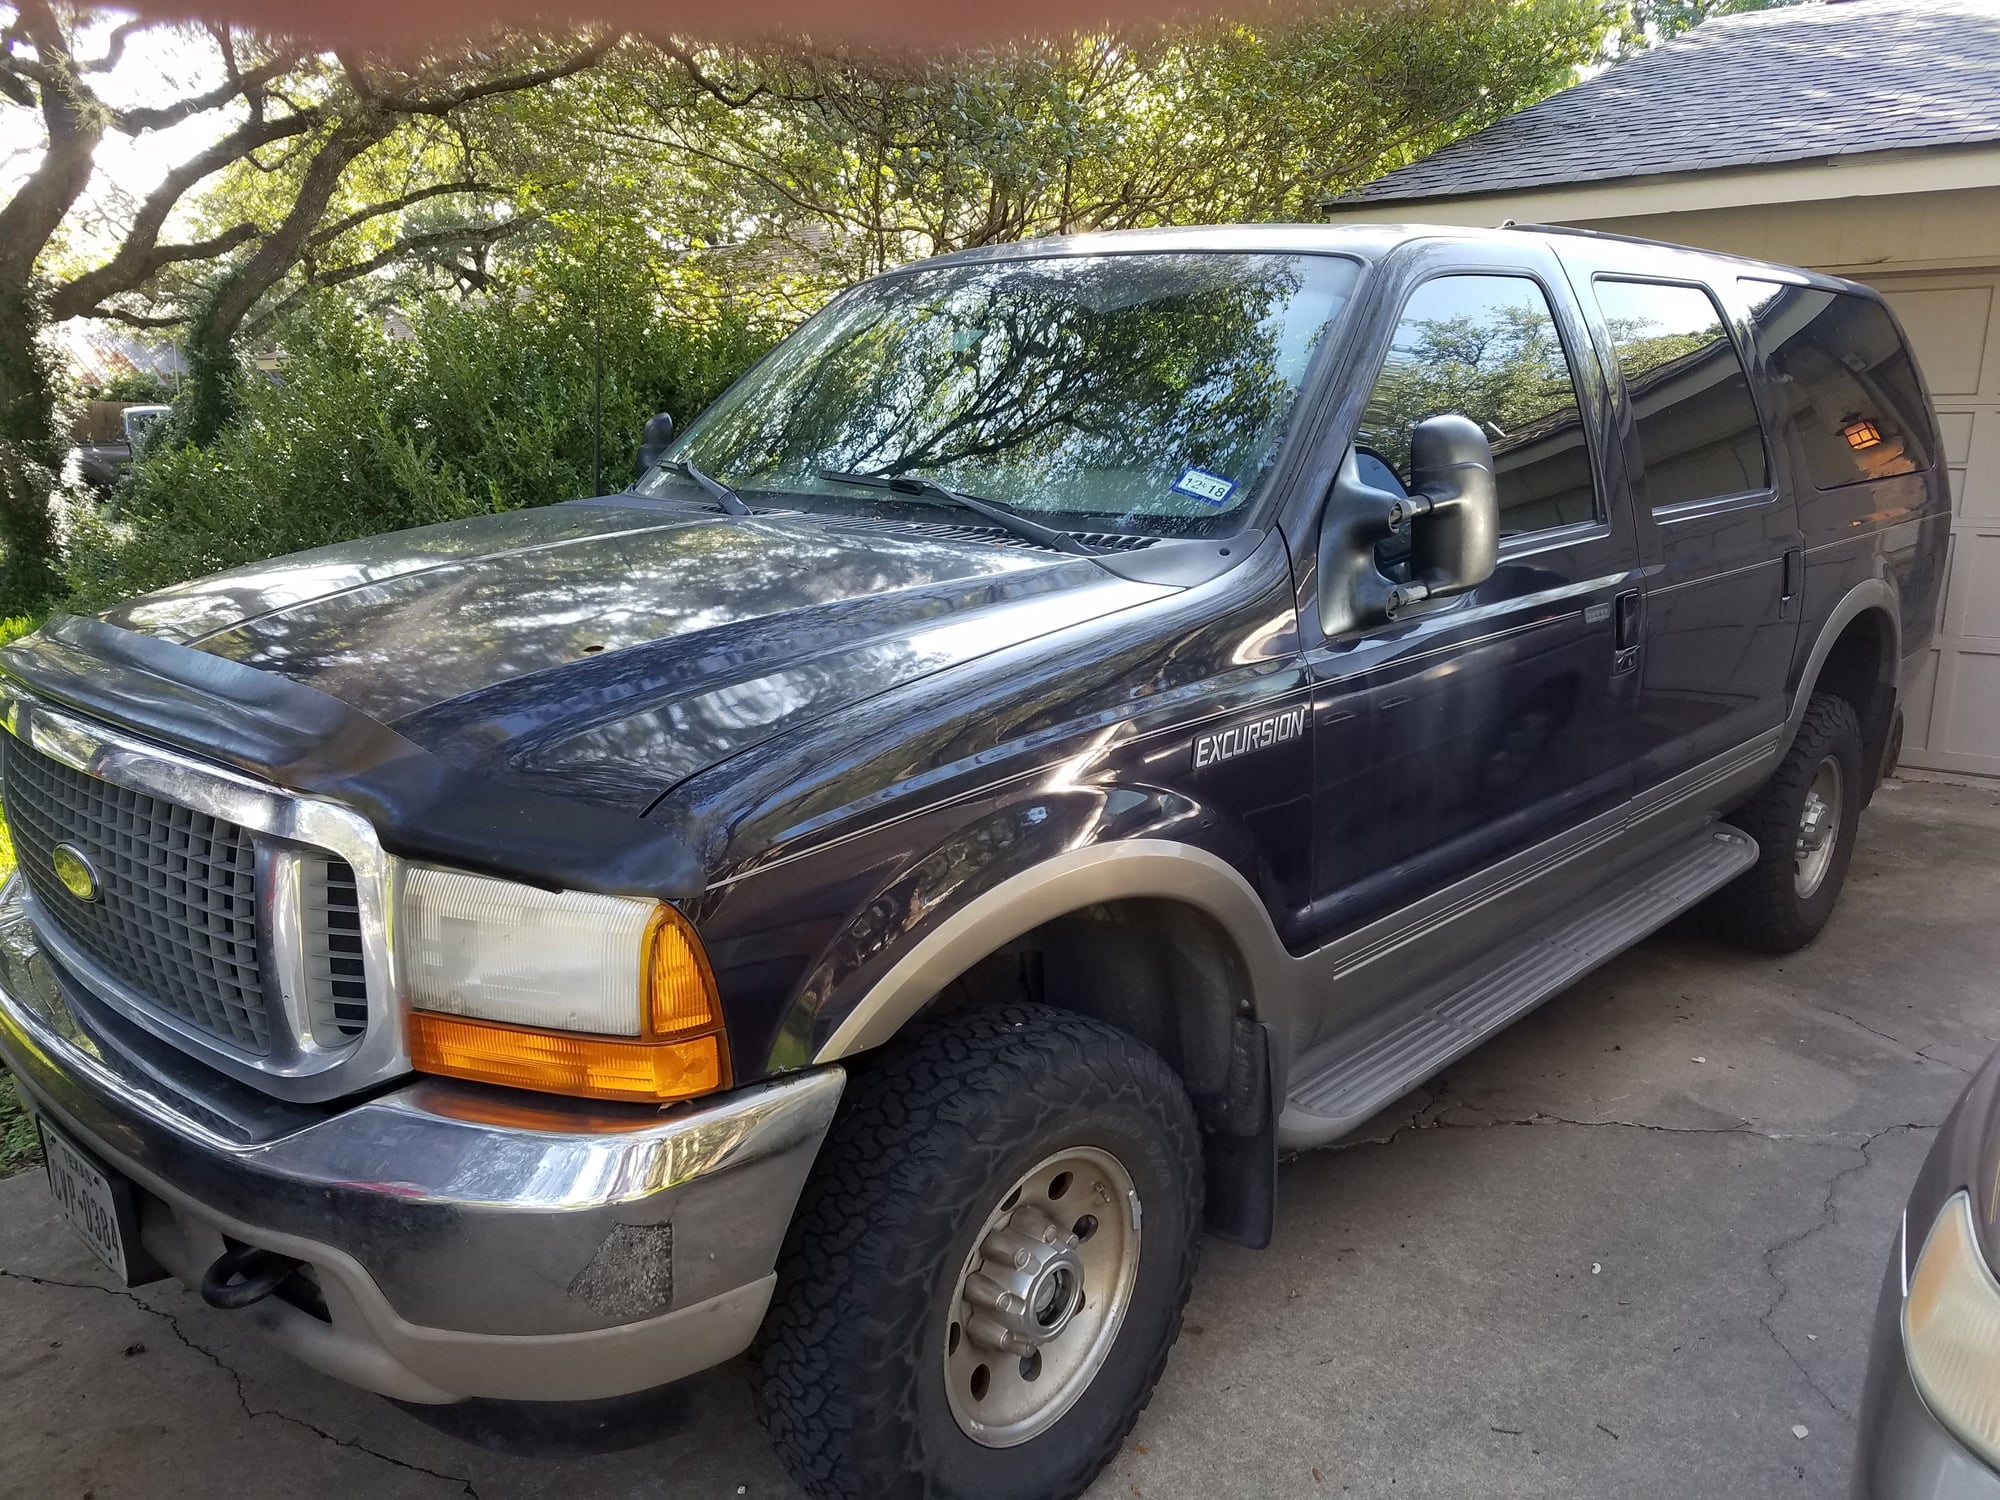 2000 Ford Excursion - 2000 Excursion Limited v10 4wd - Used - VIN 1FMNU43S5YEC60578 - 235,900 Miles - 10 cyl - 4WD - Automatic - SUV - Blue - Austin, TX 78729, United States